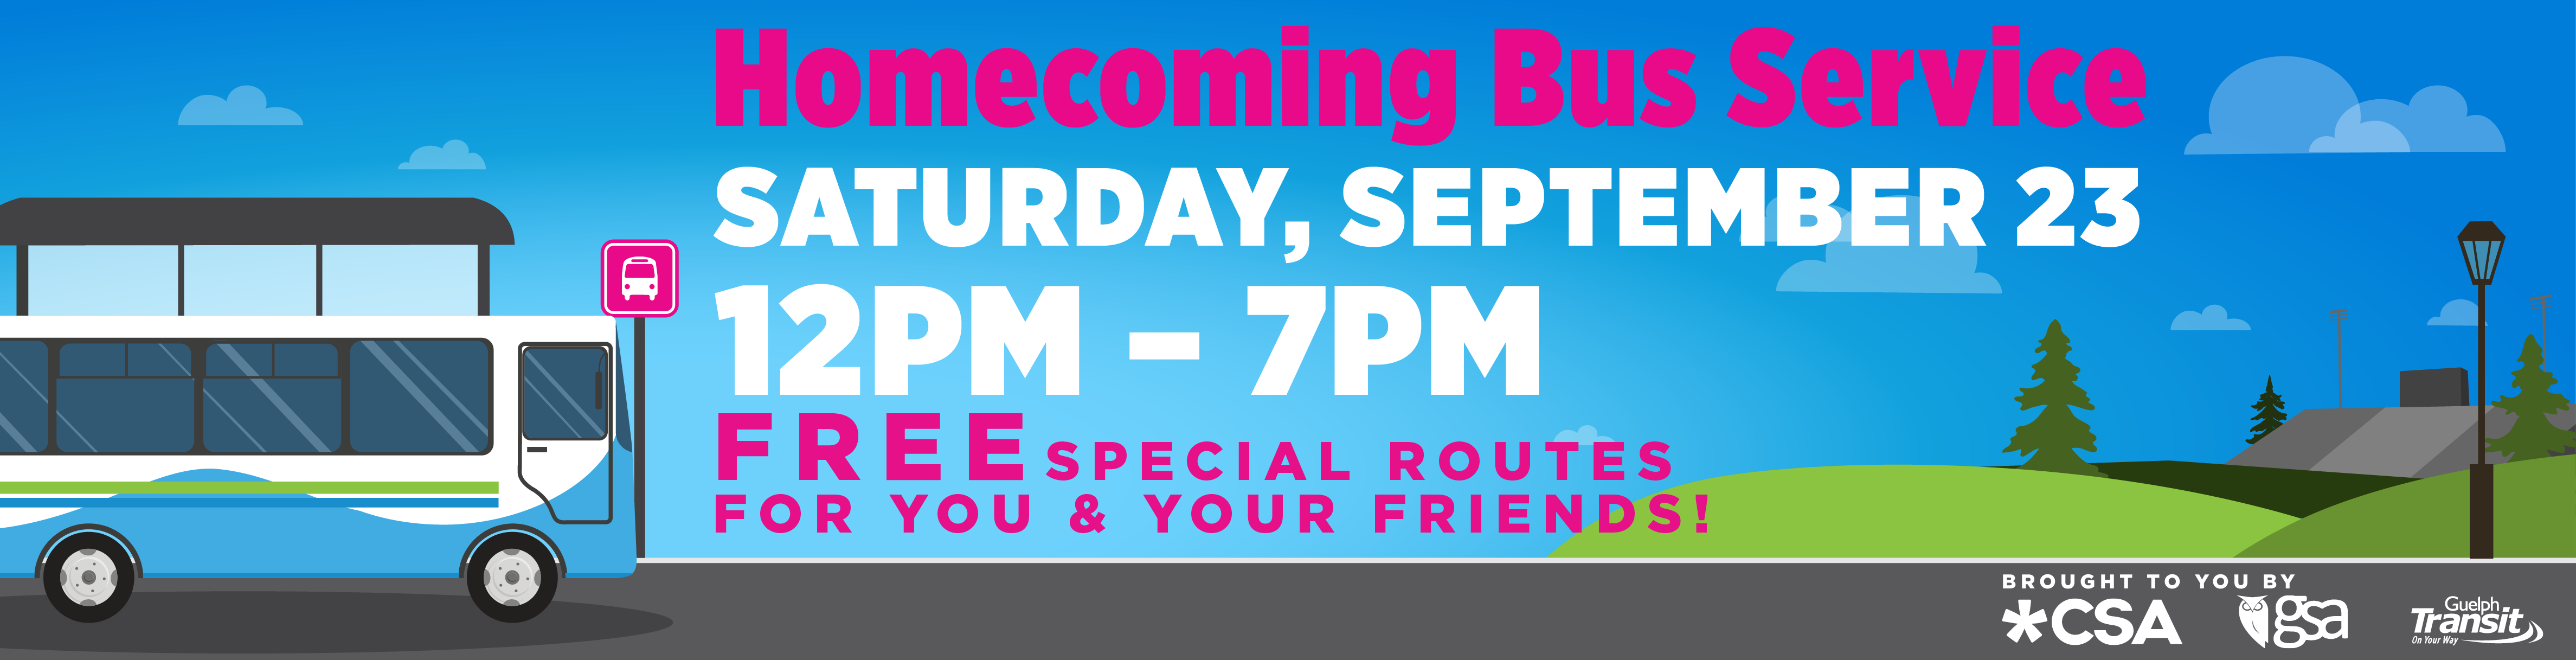 Homecoming Bus Service - Saturday, September 23 12PM-7PM